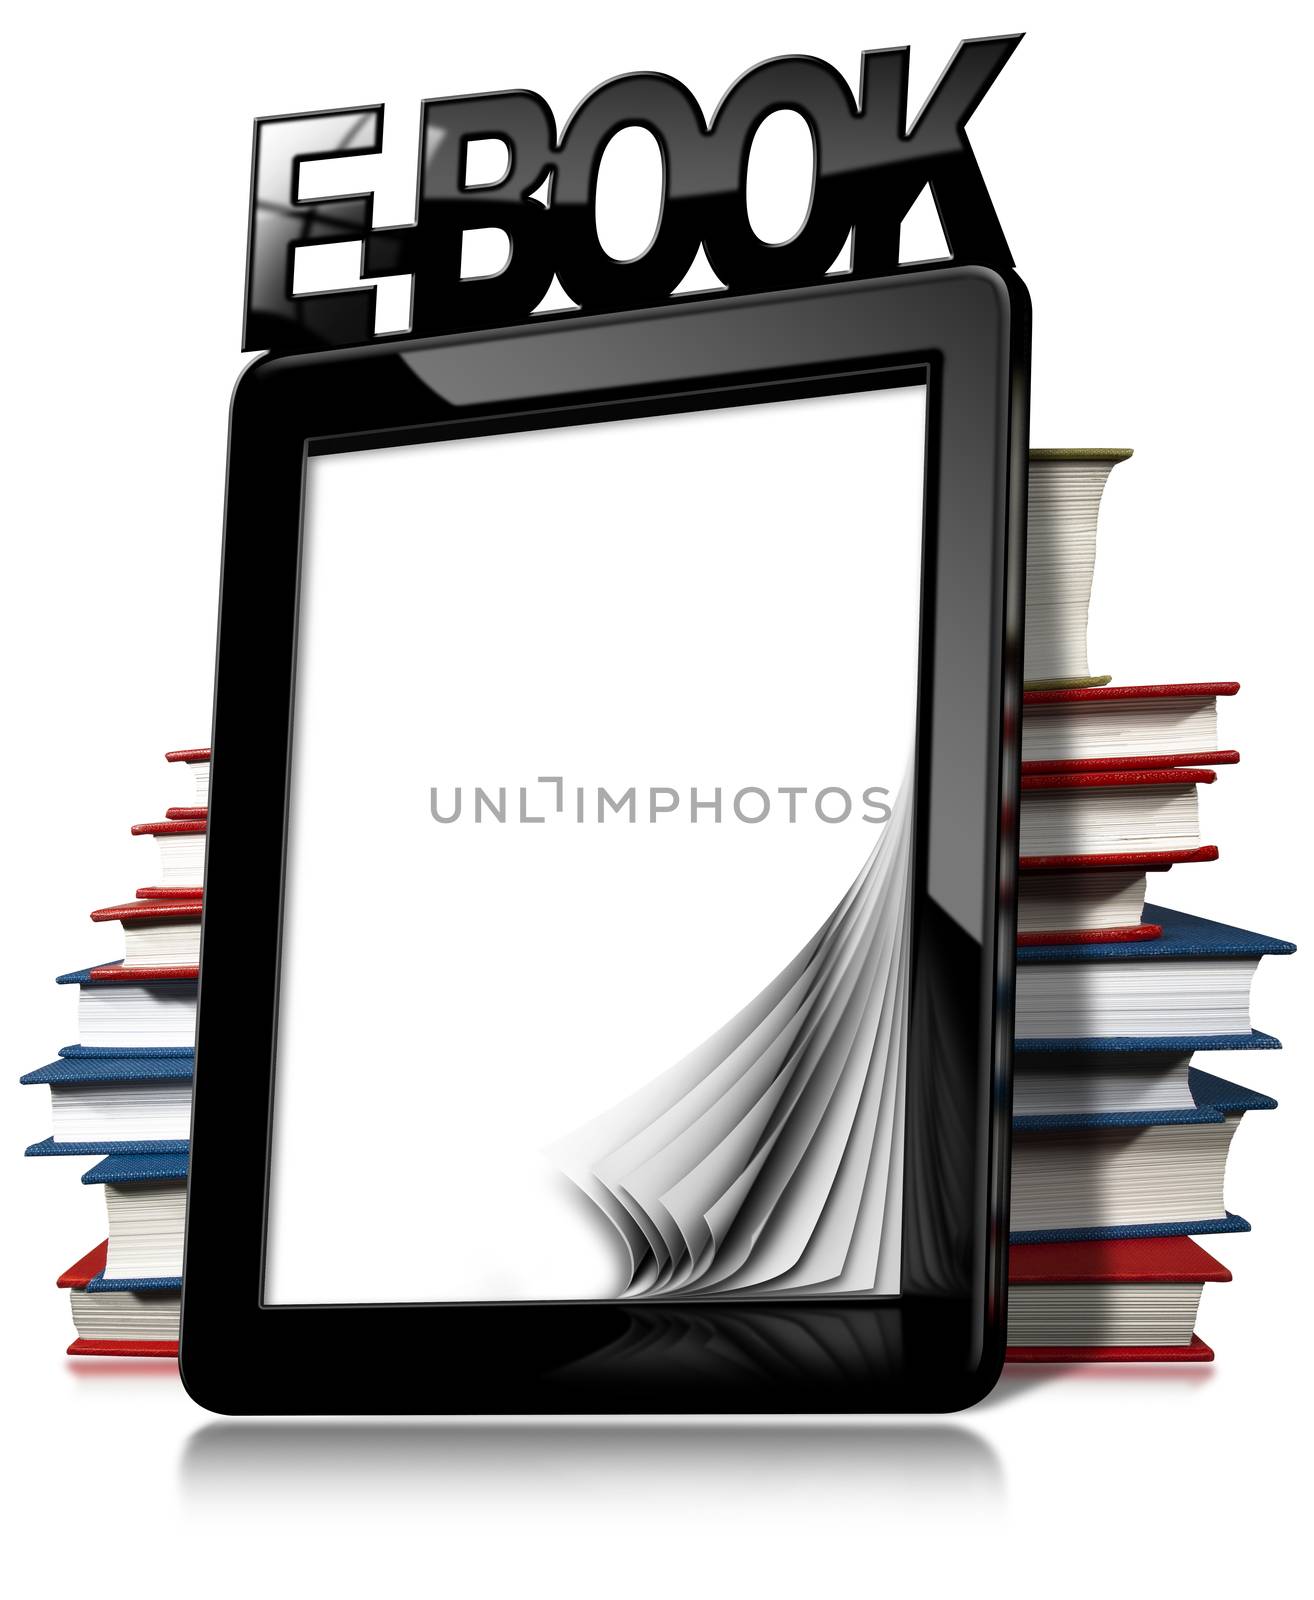 Black modern ebook reader with blank curled pages, text Ebook and a stack of books. Isolated on white background